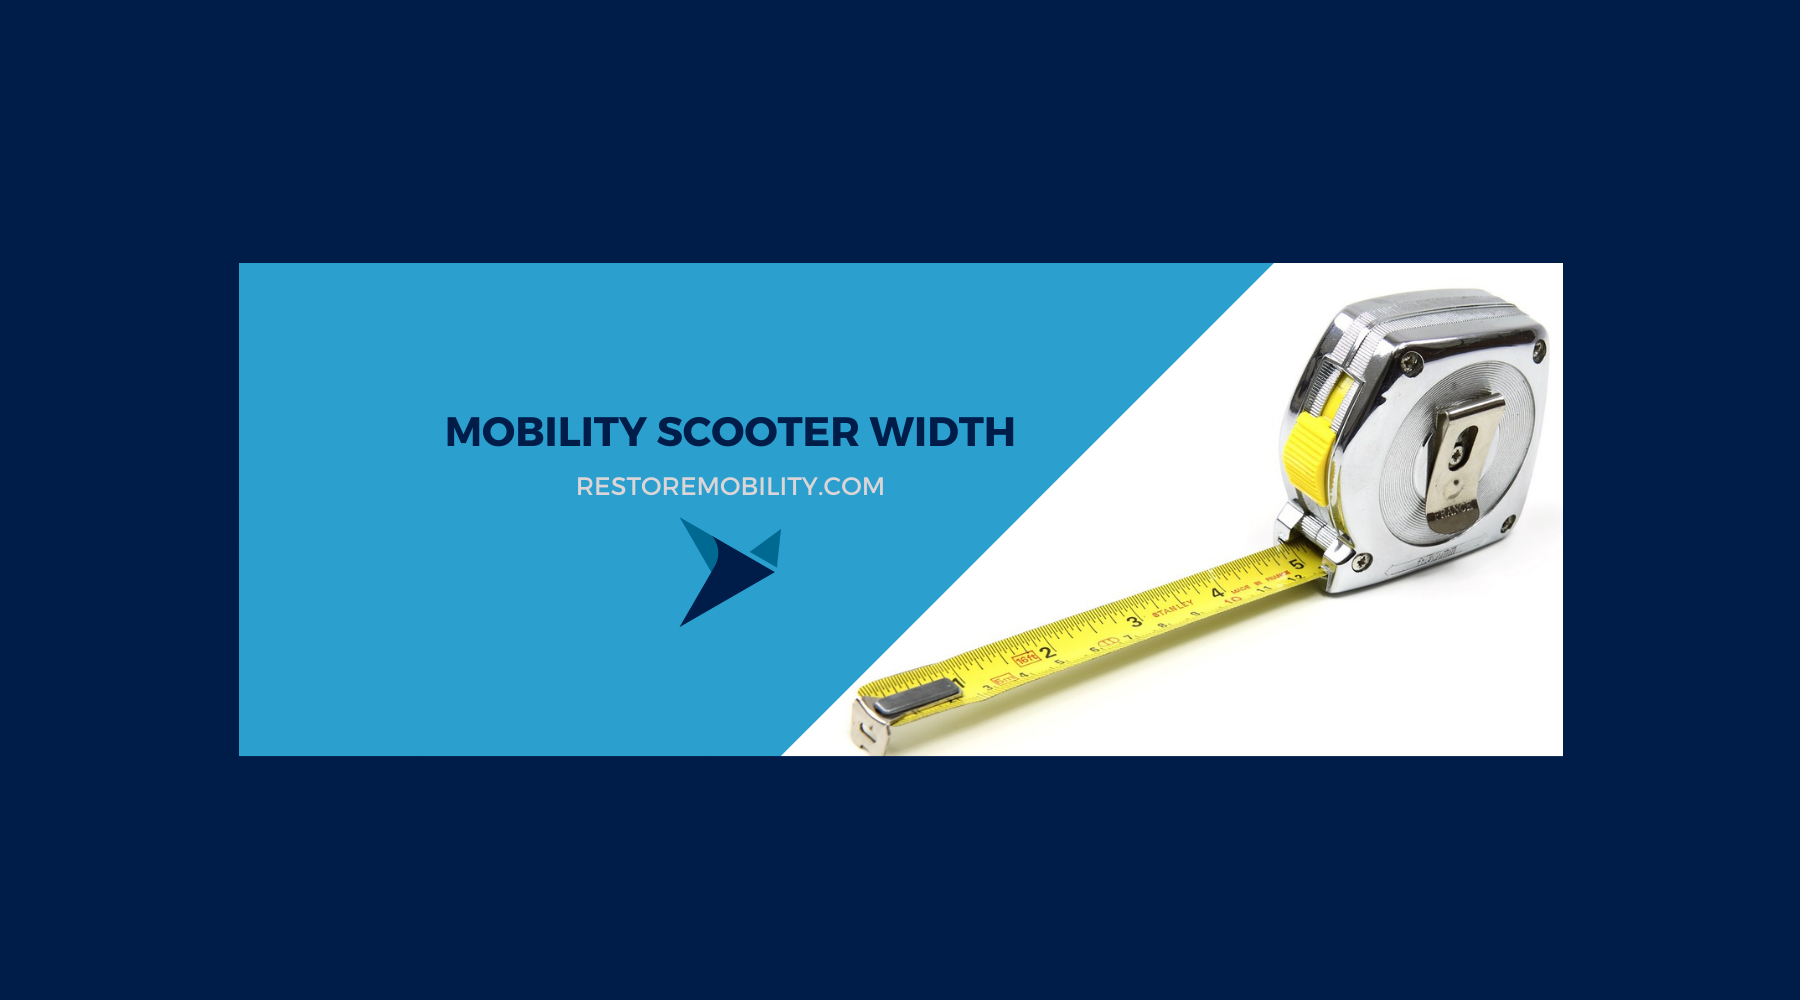 Mobility Scooter Width: A Guide to Sizing and Selection